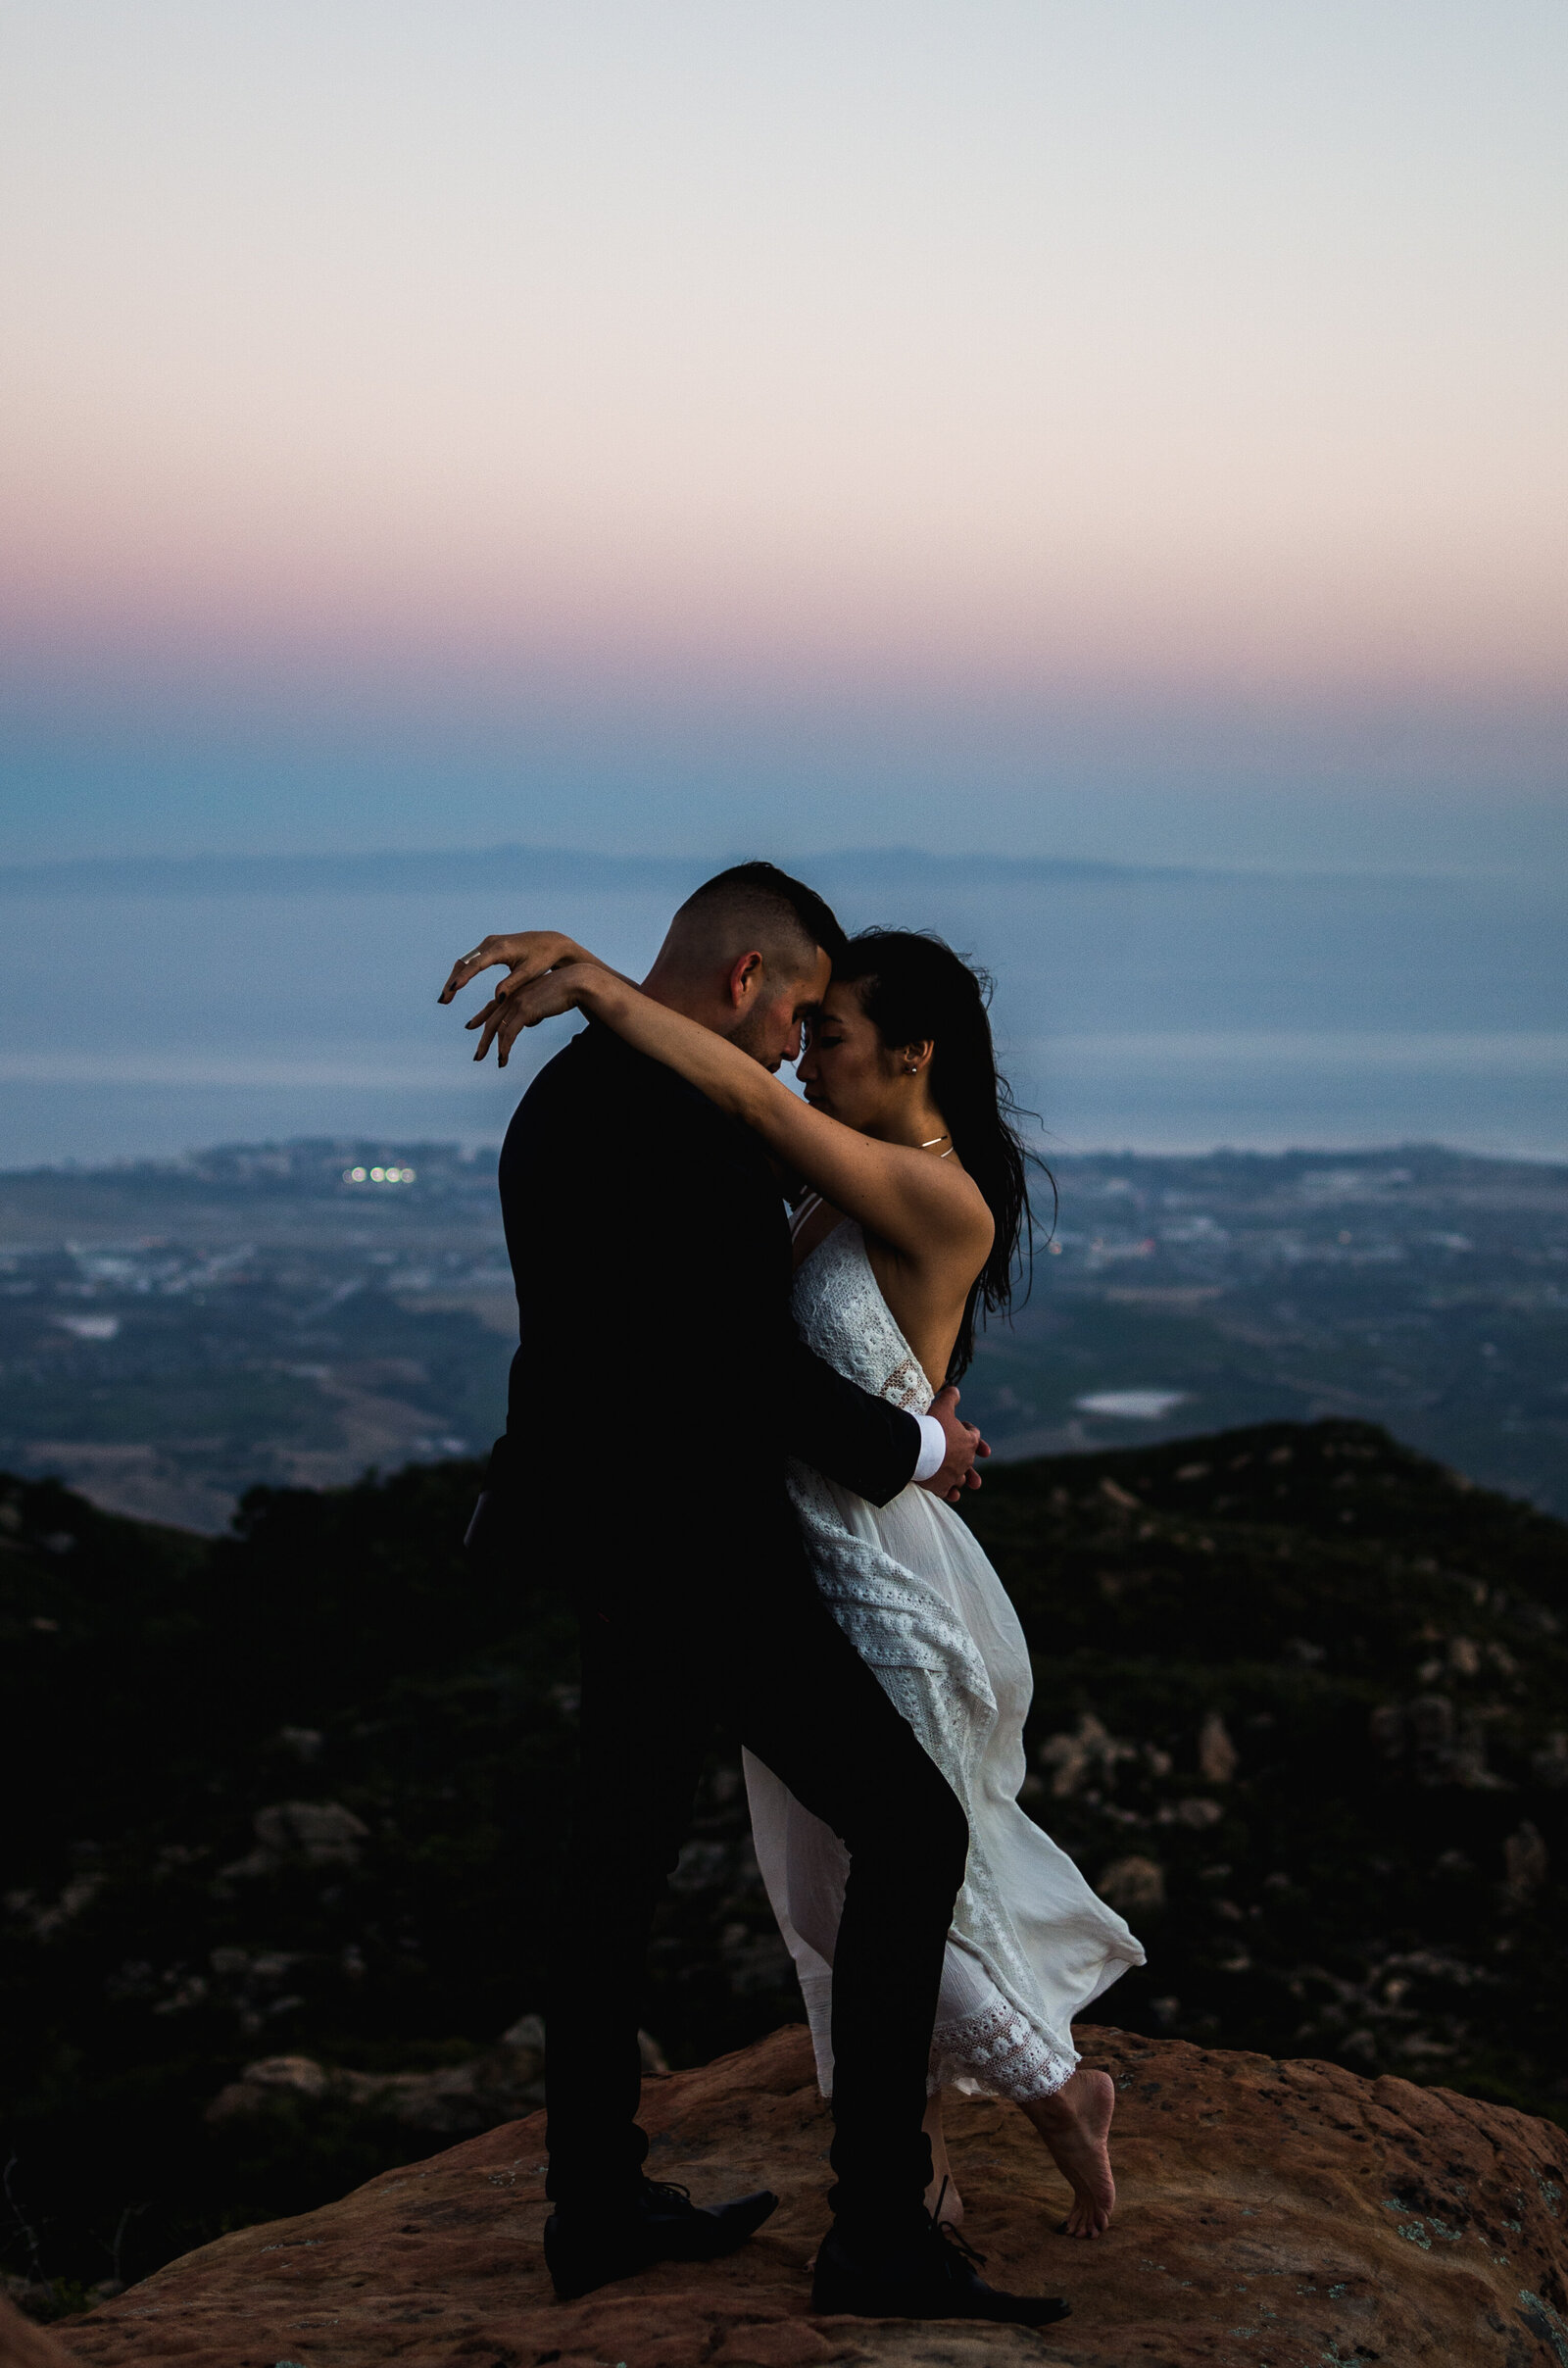 Couple holding each other on a rock on top of the mountain, with the city in the background.